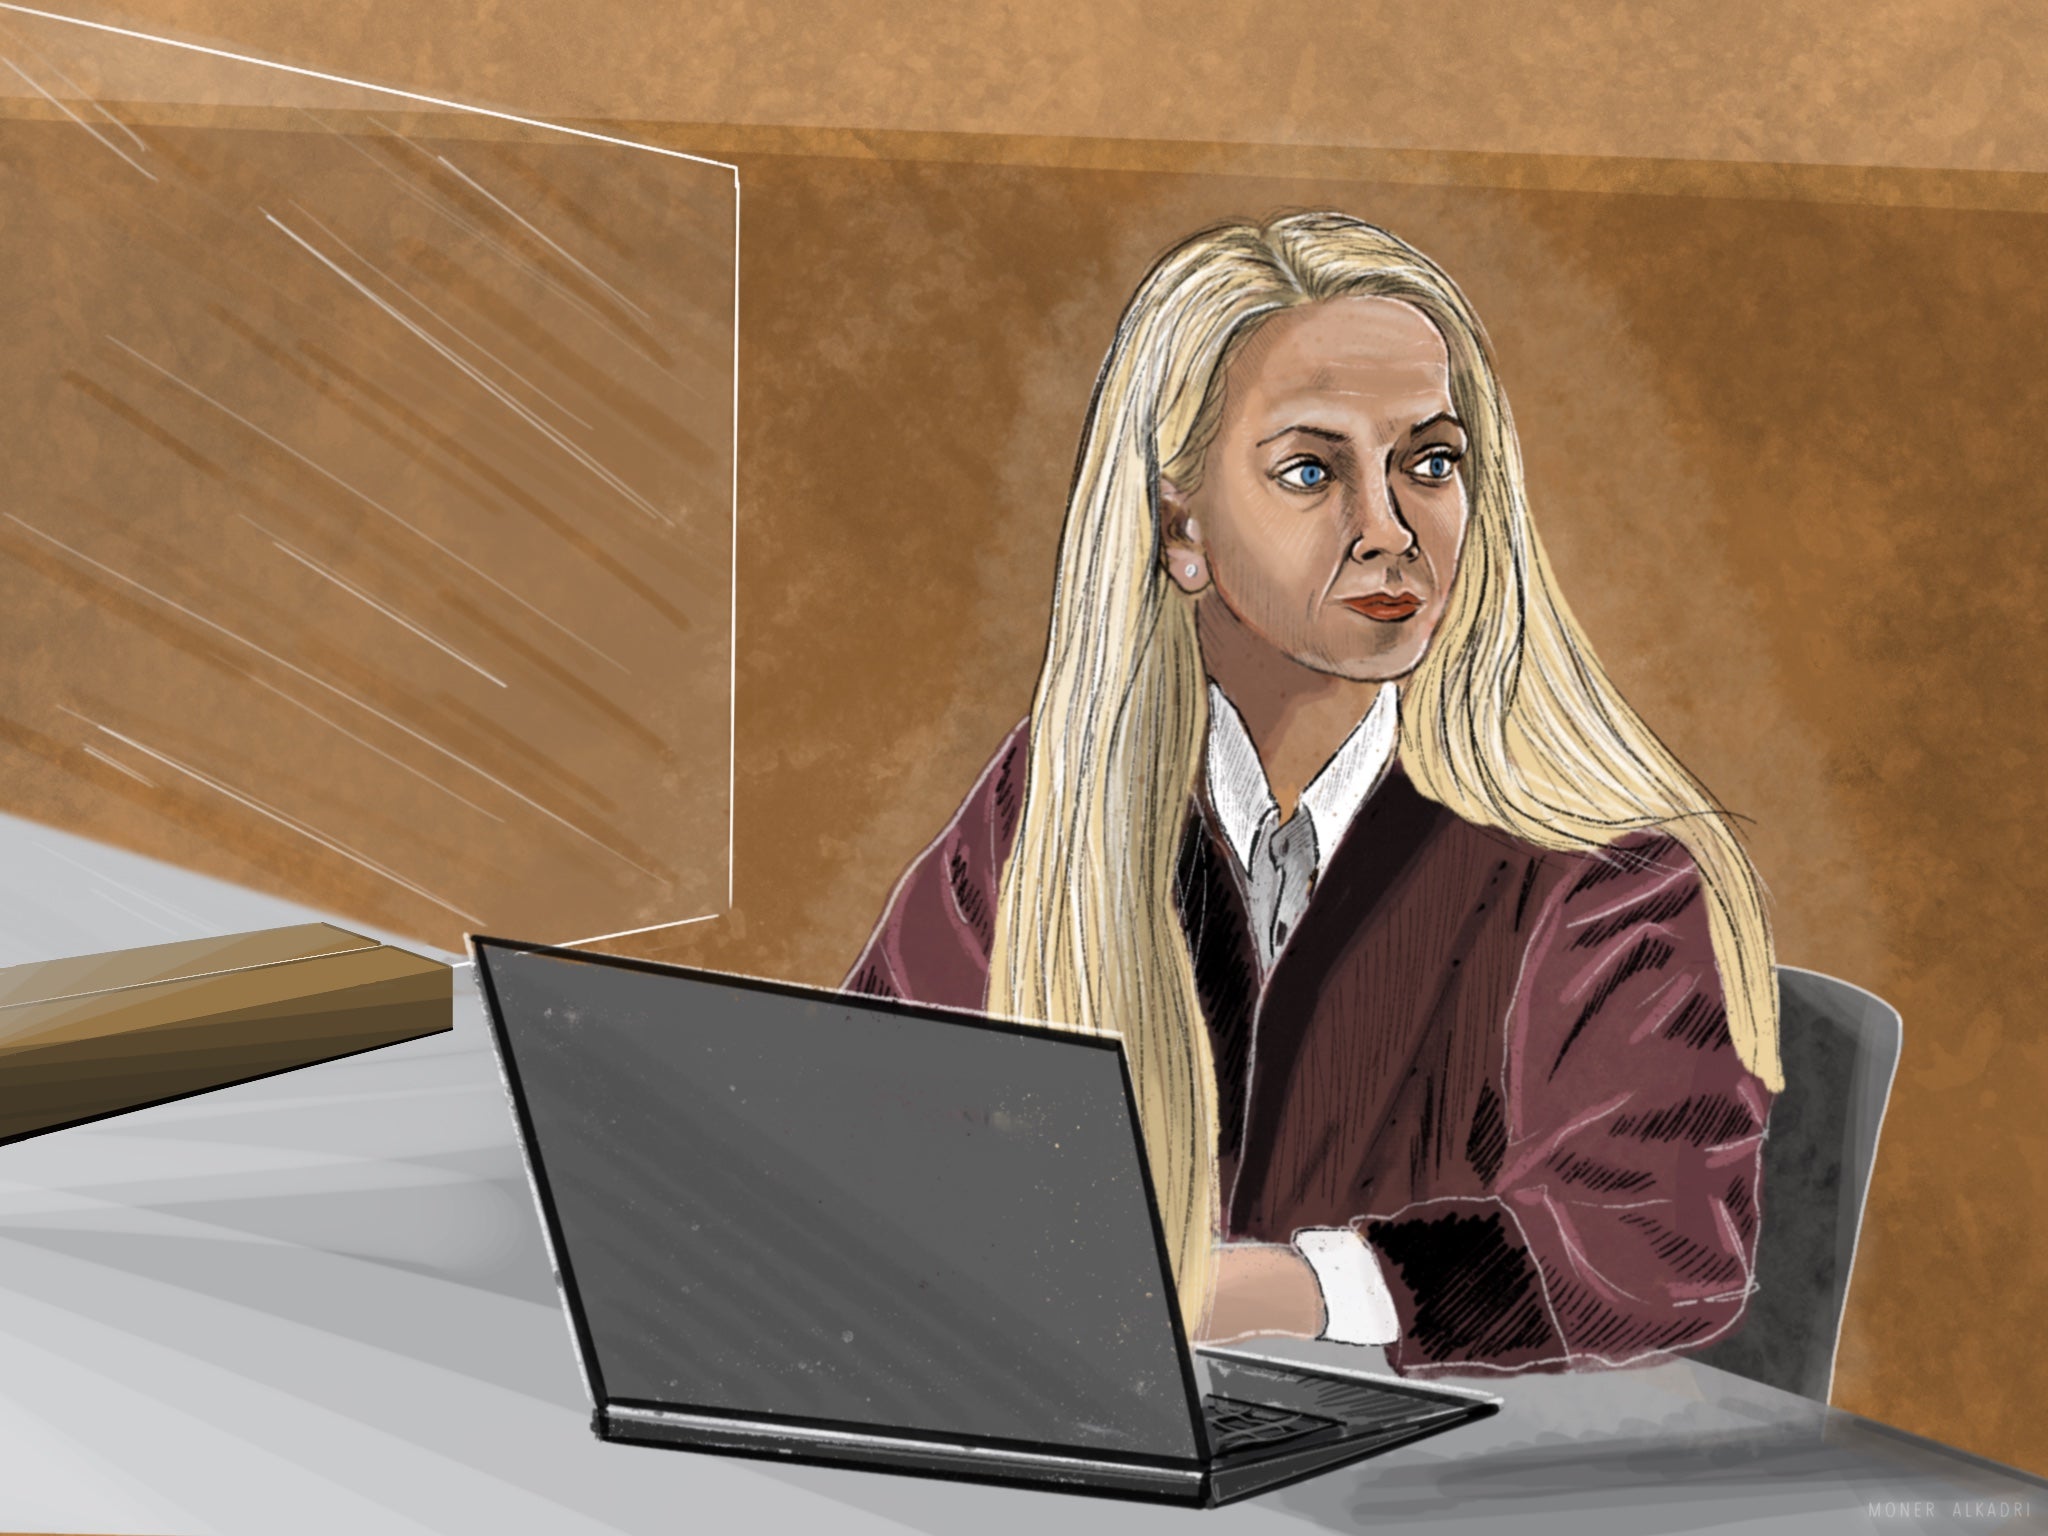 Illustration of a blonde woman working on a laptop